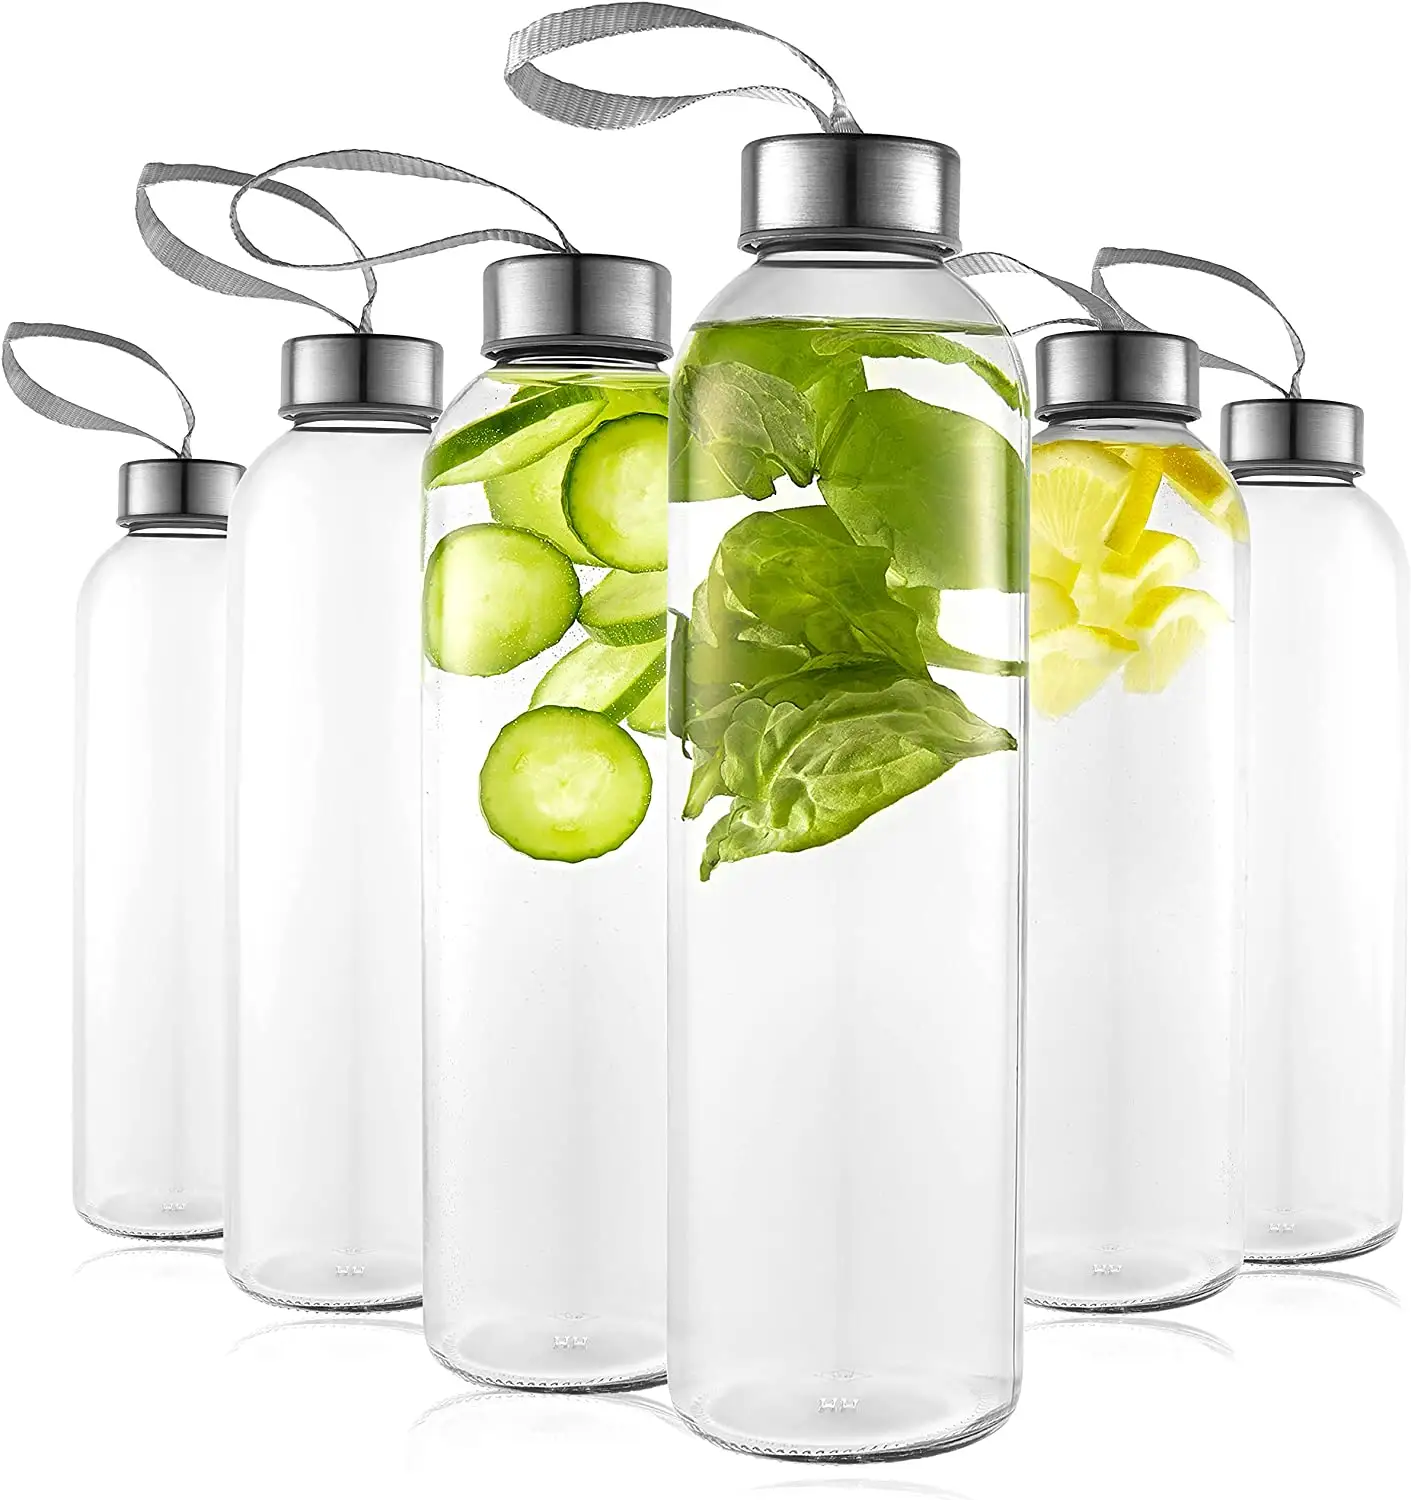 Hot Sale 16oz 24oz 32oz Clear Round Glass Drinking Water Bottle With Lids And Sleeves